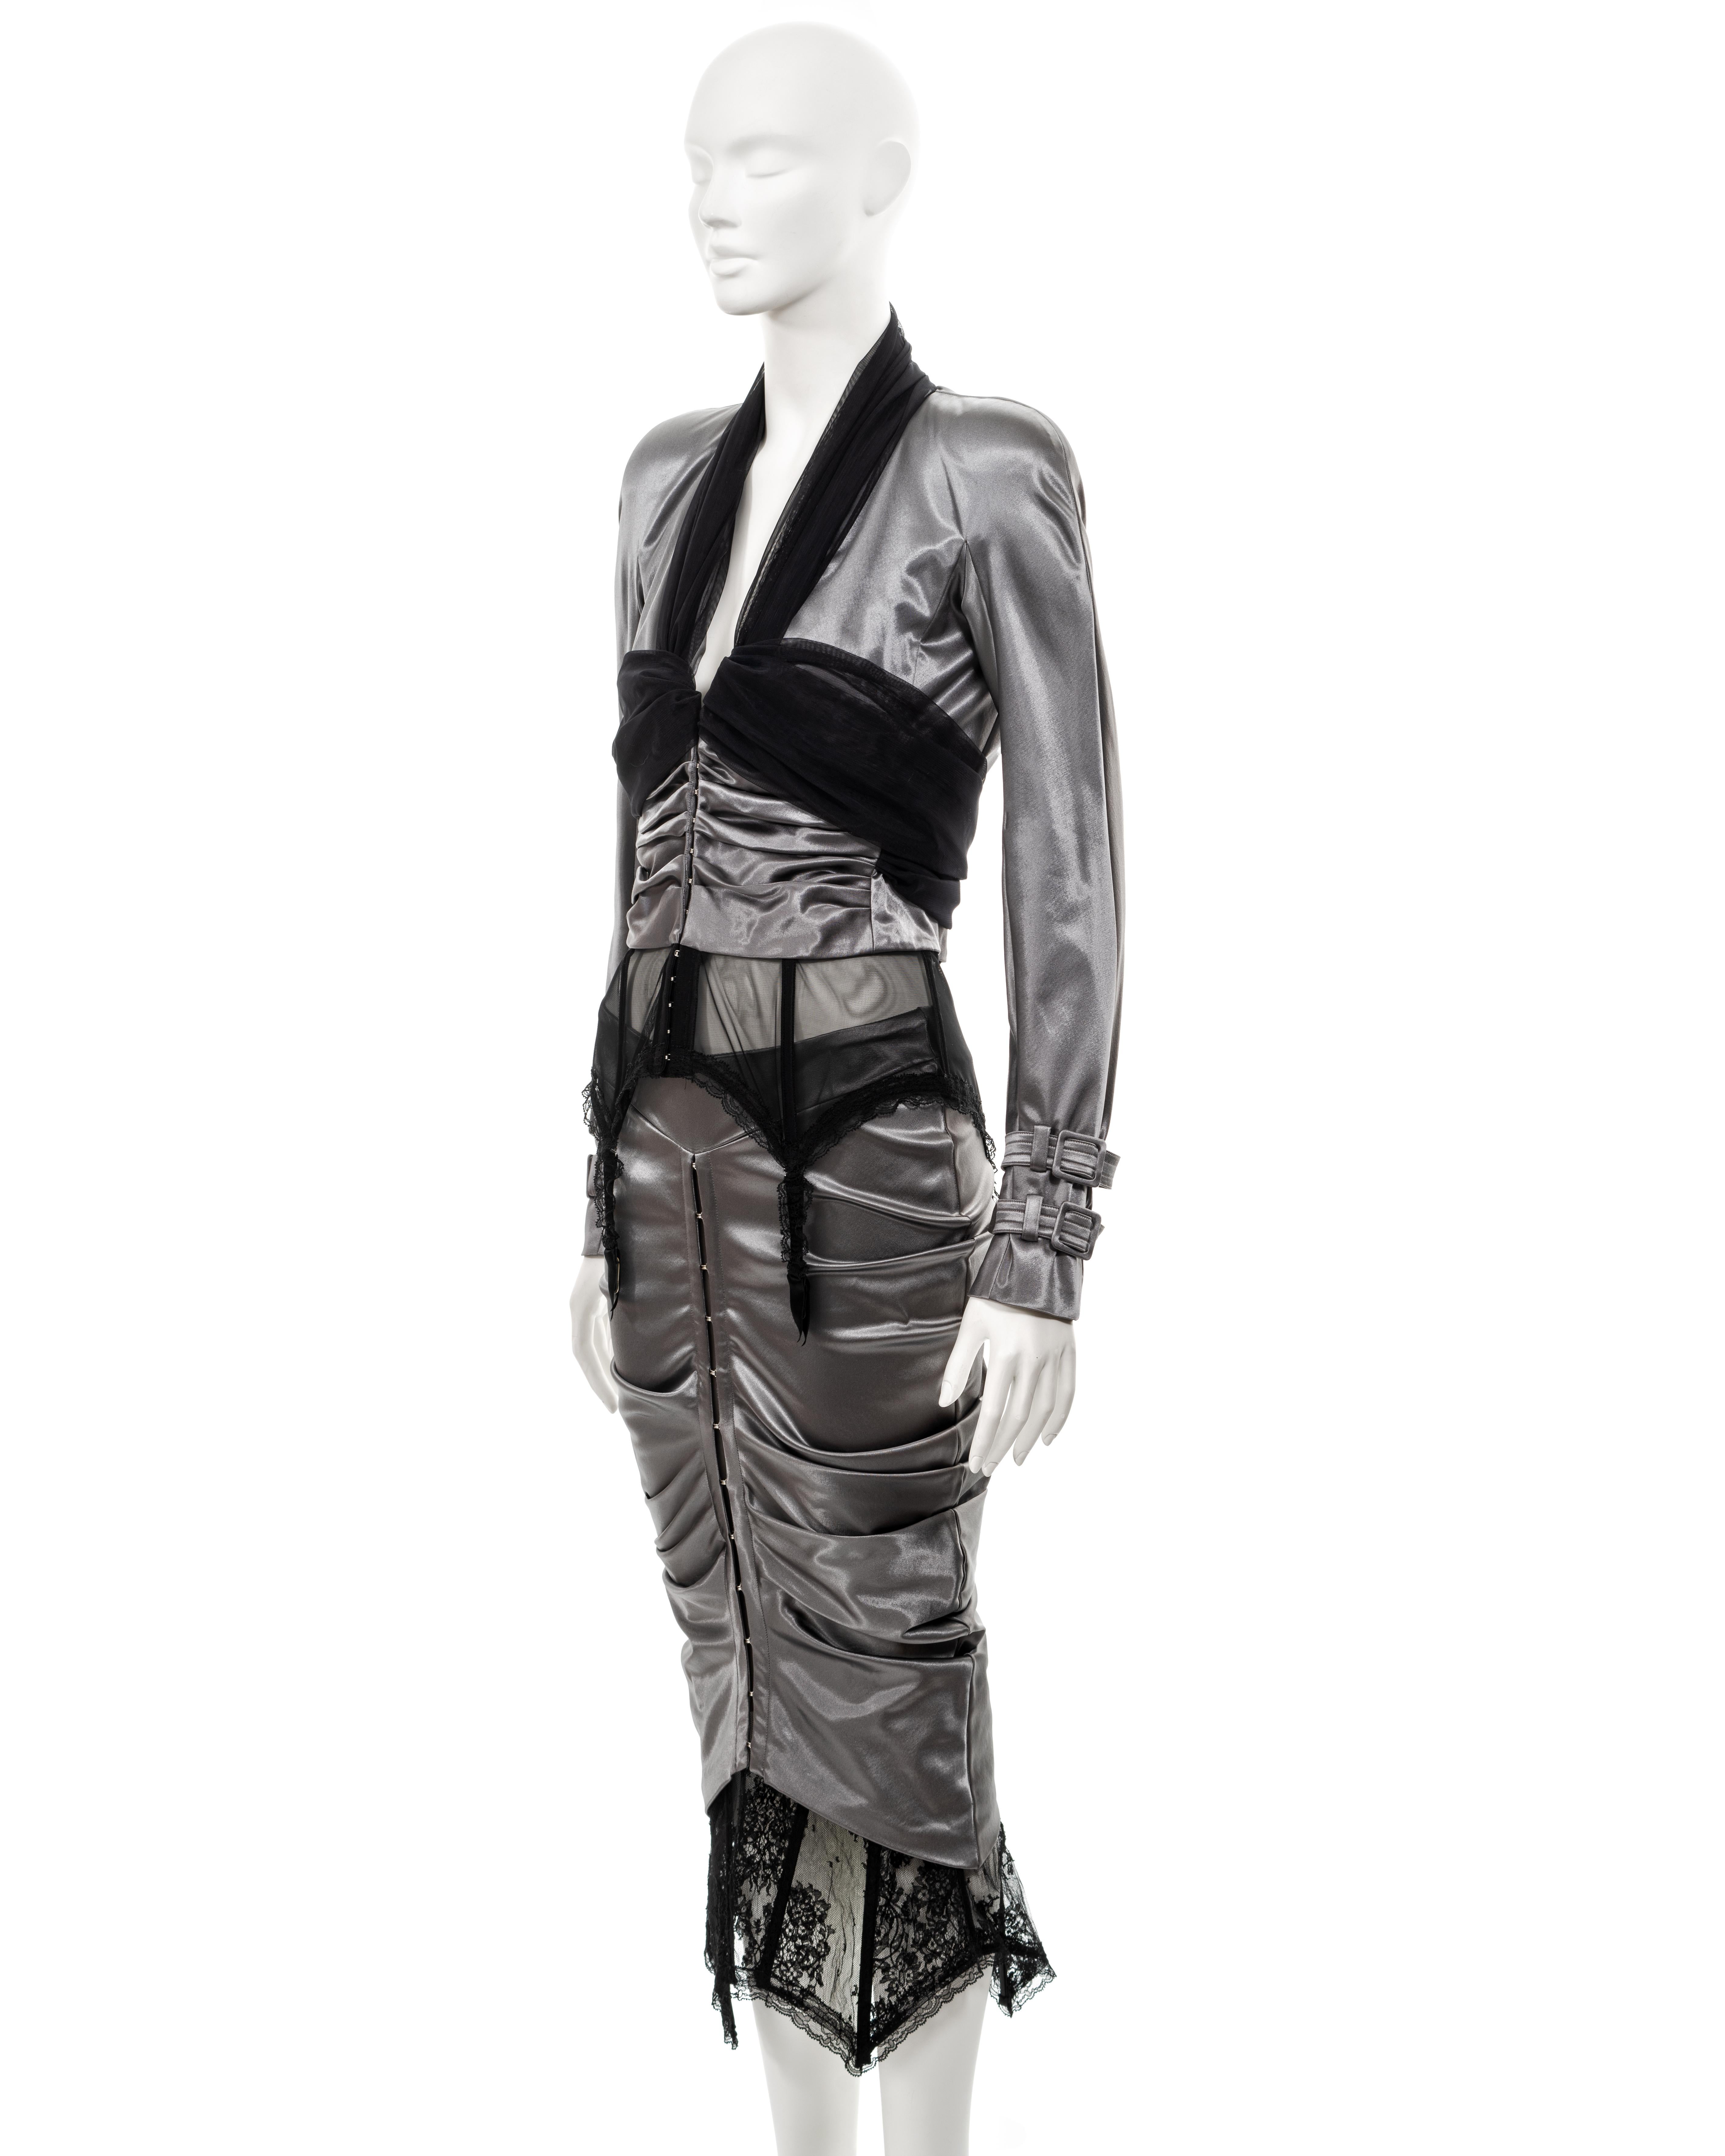 Christian Dior by John Galliano silver-grey stretch satin skirt suit, ss 2004 11